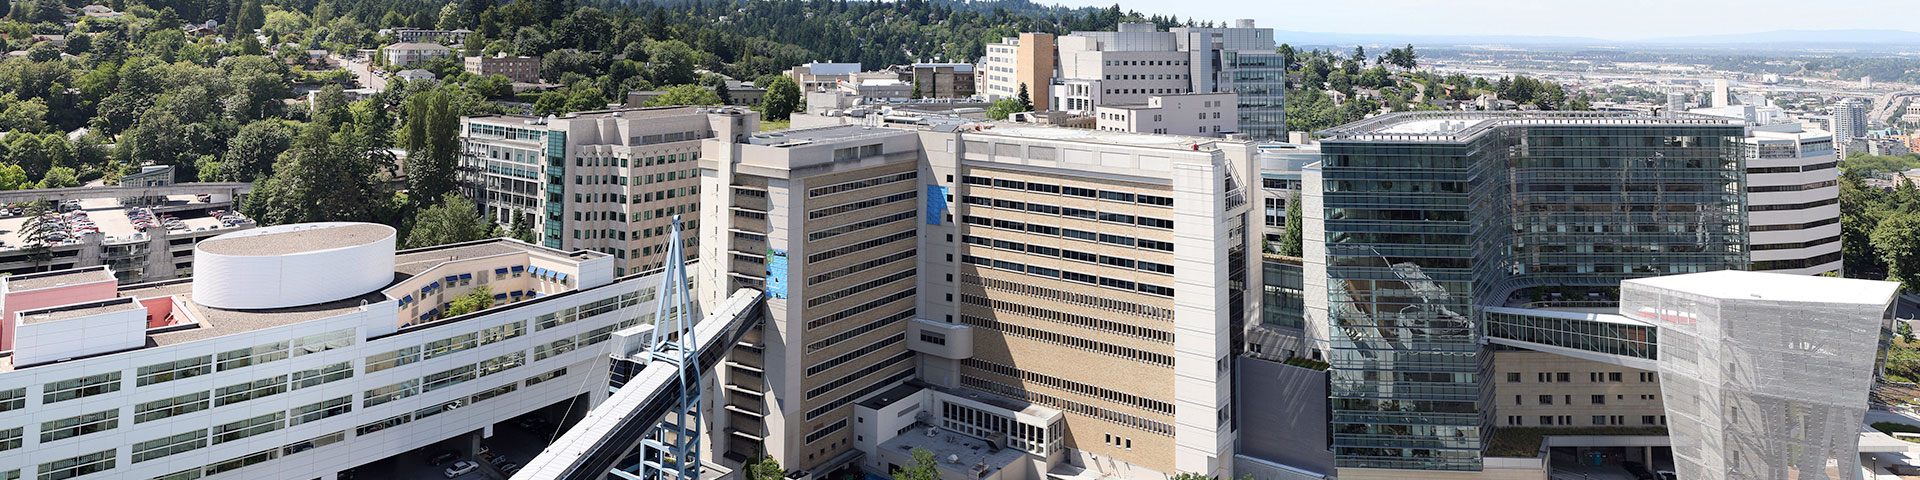 Picture of OHSU skybridge and main hospital. 